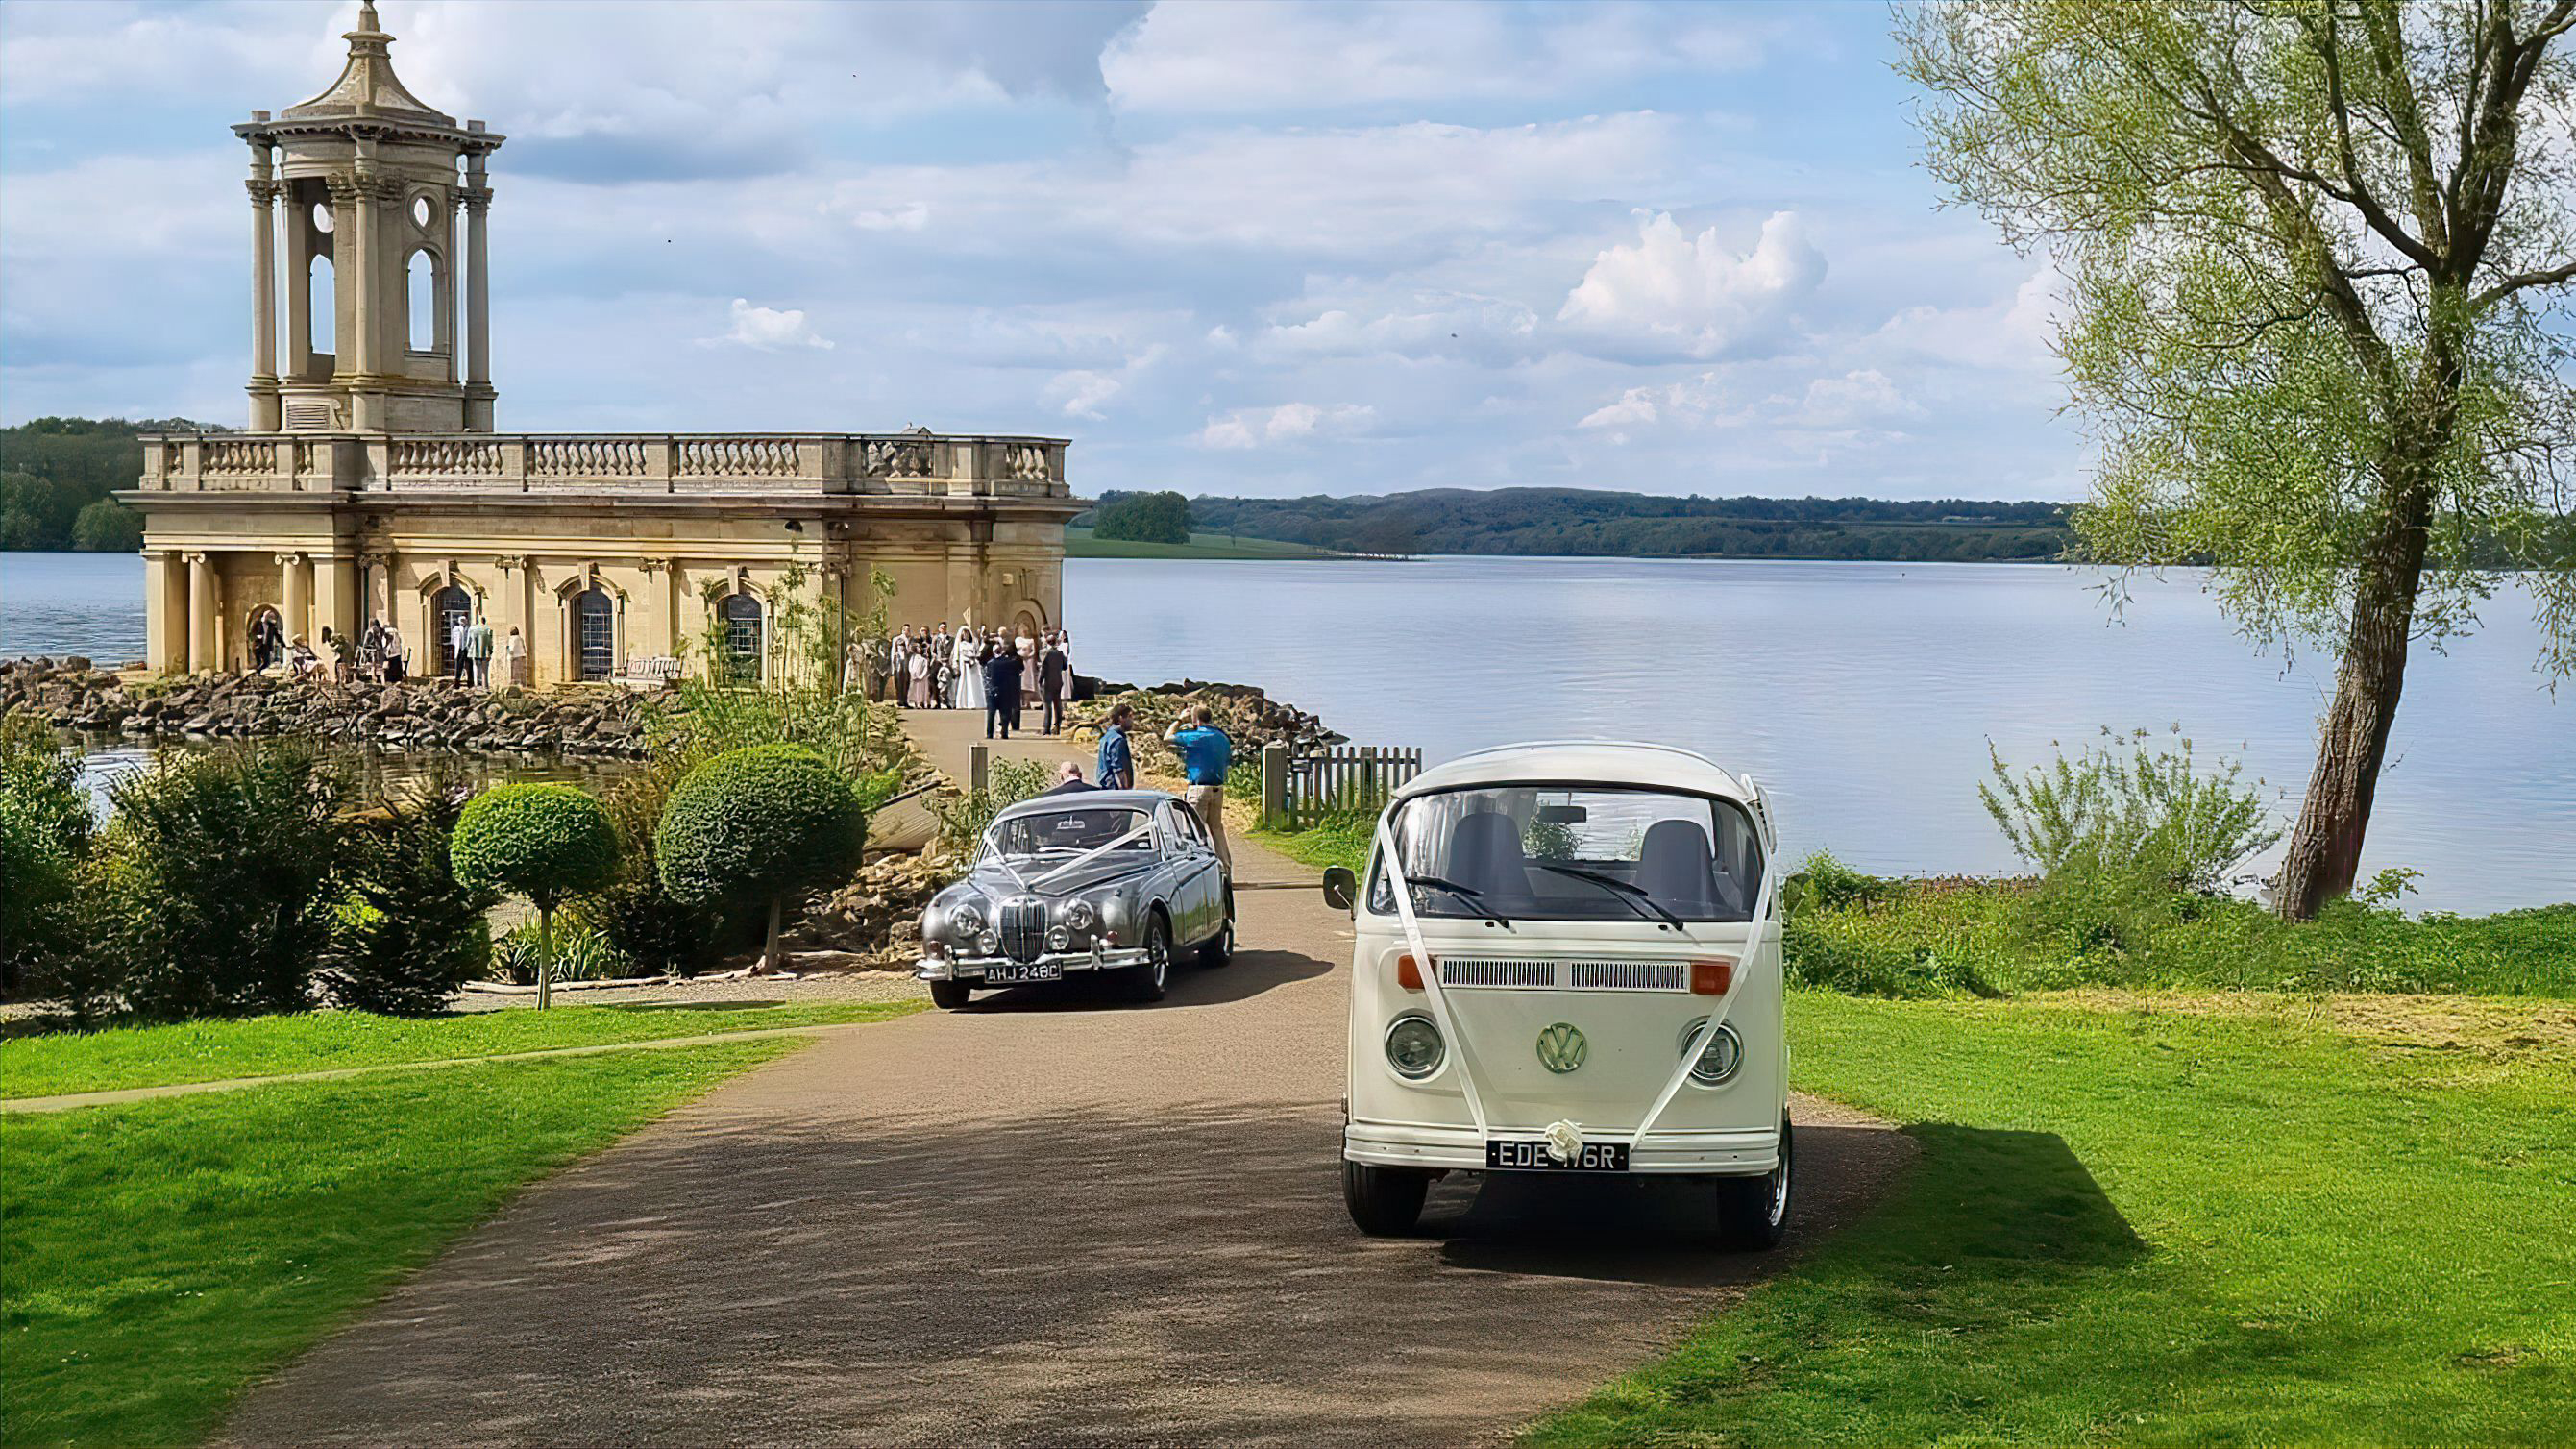 A classic VW campervan followed by a Jaguar Mk2 in front of Normanton Church in Rutland. Both vehicles are decorated with matching white ribbons. Wedding guests can be seen in the background.